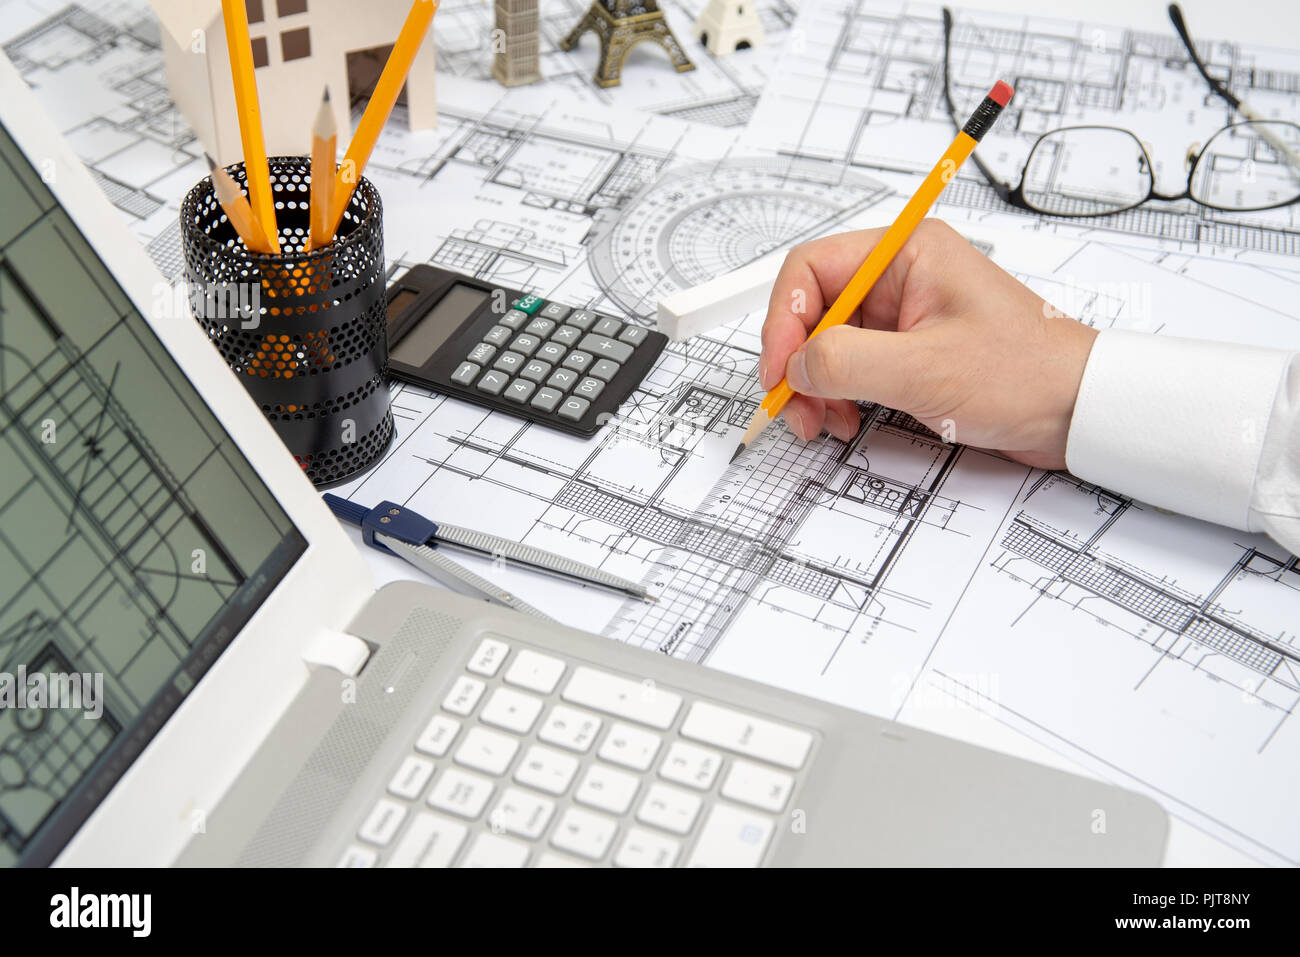 The hand of a male architect drawing a design using a pencil. Stock Photo